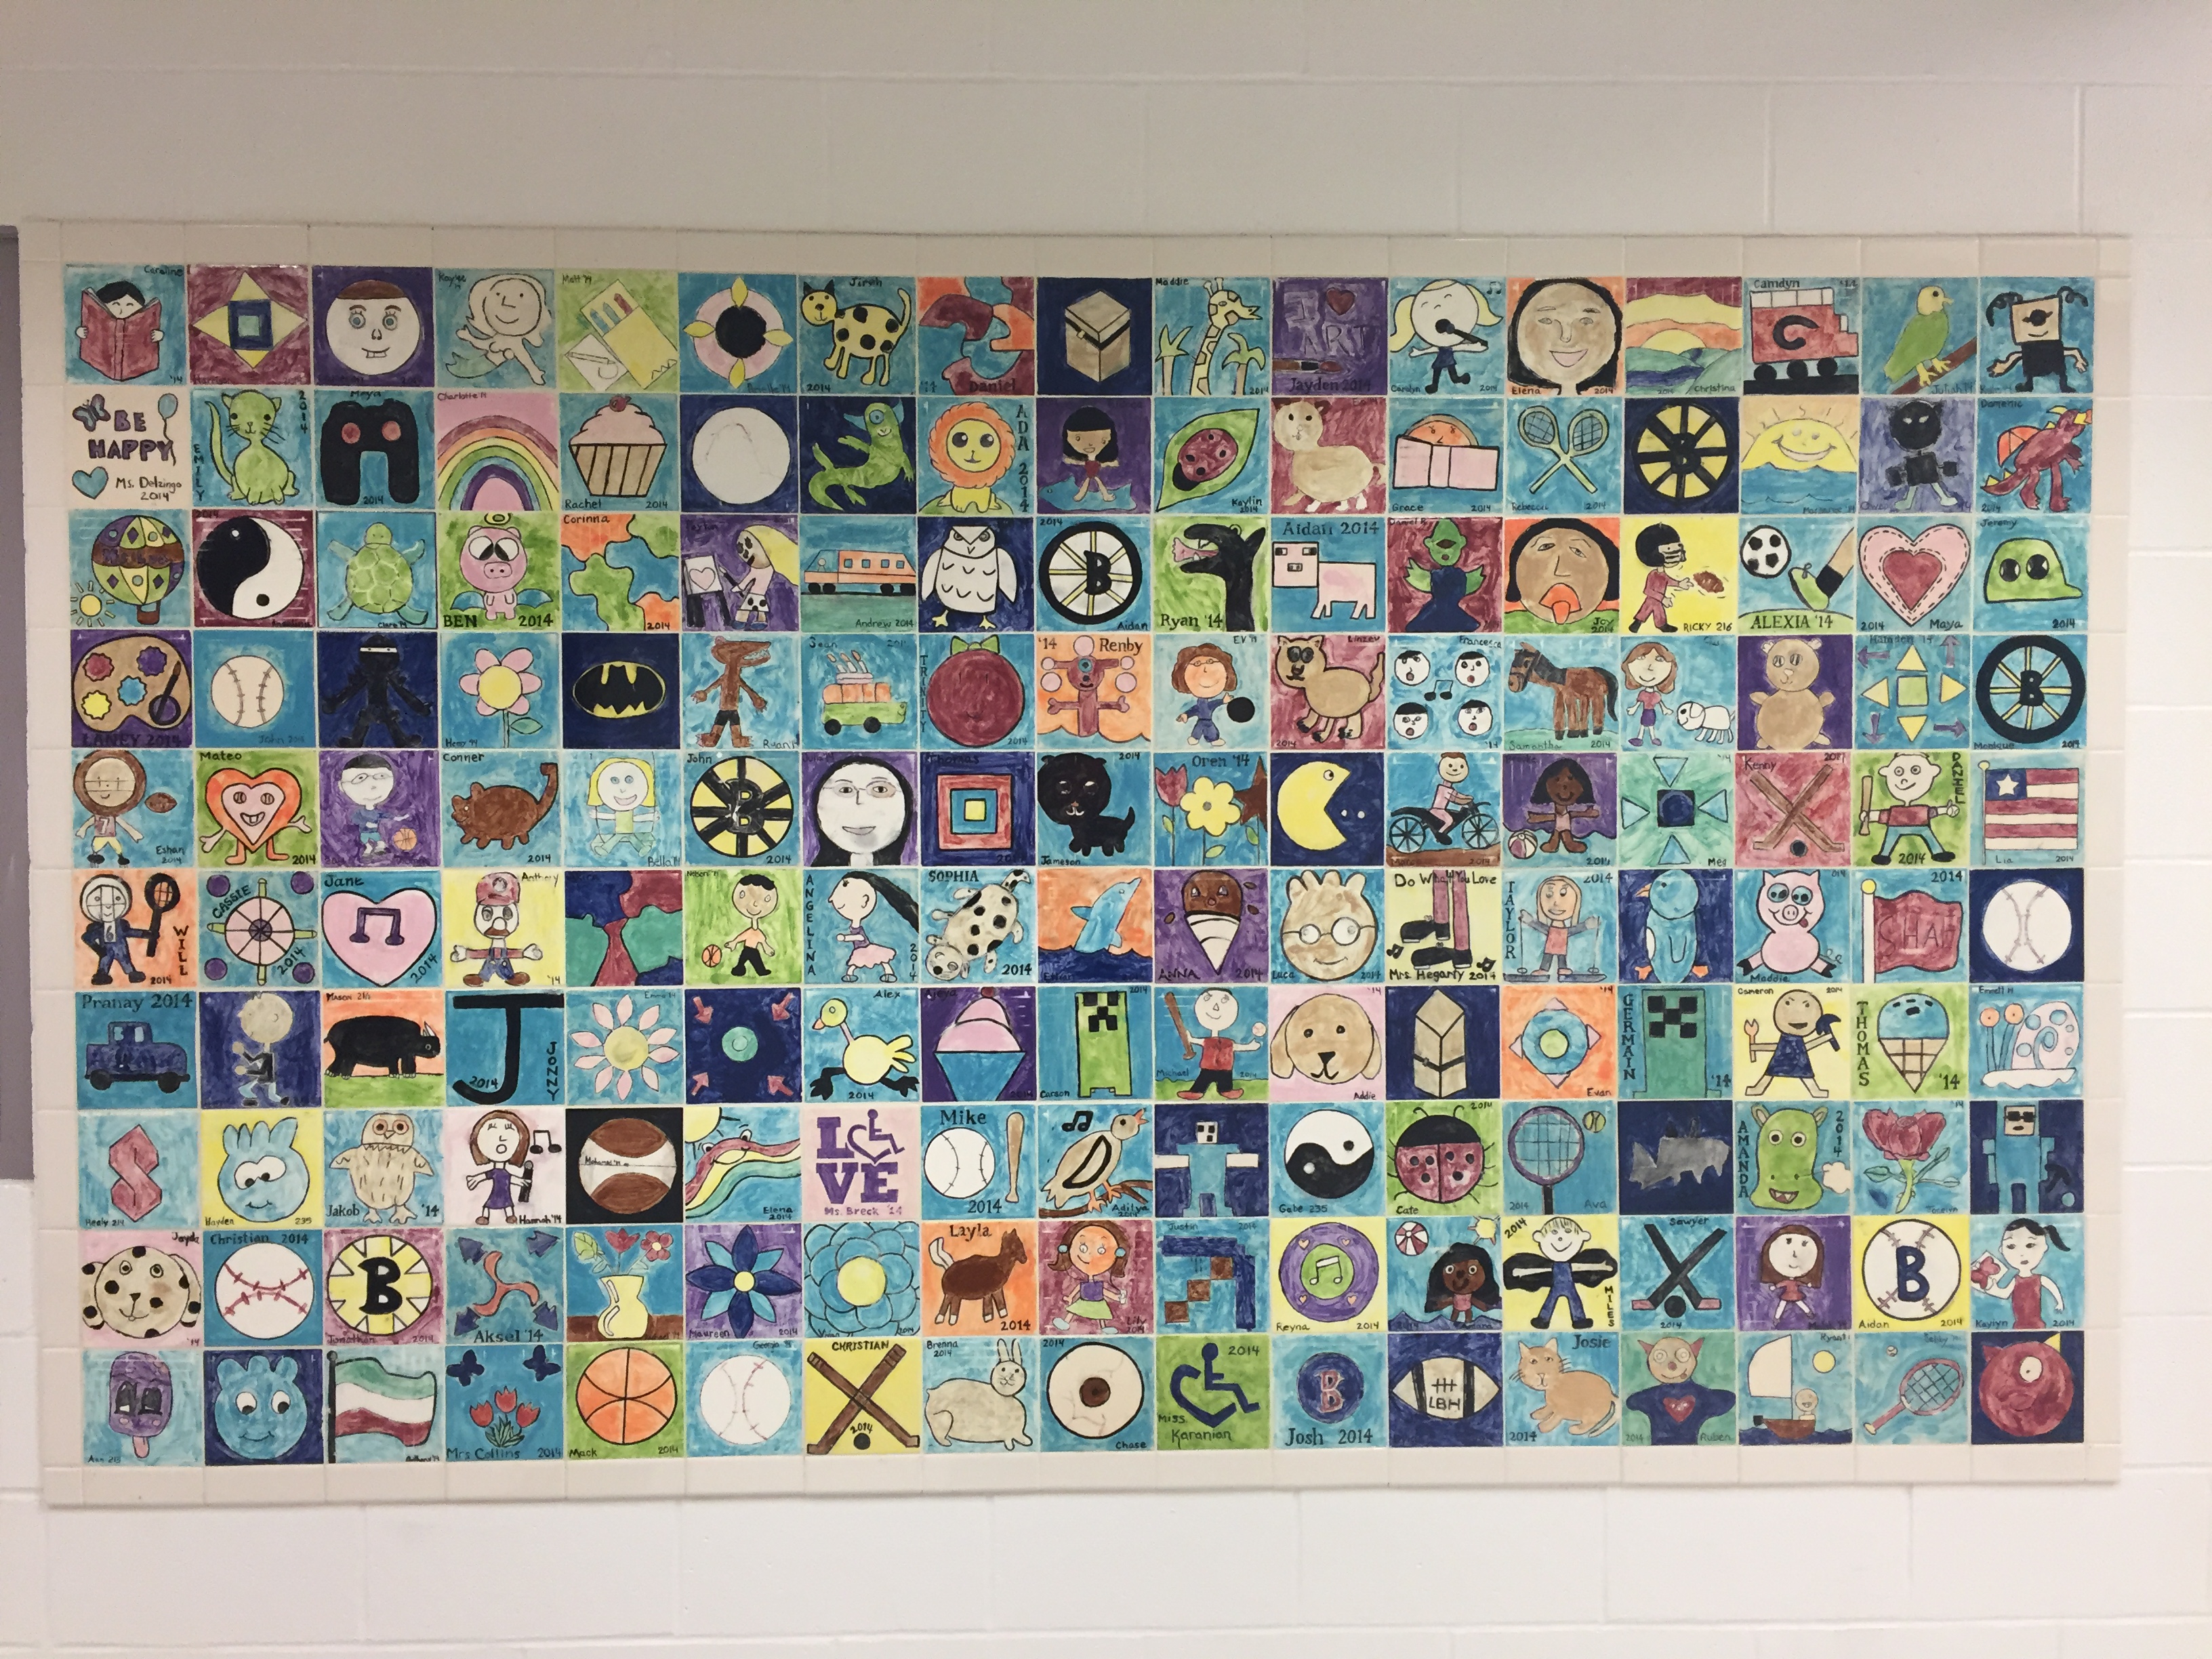 Tiles painted by former students